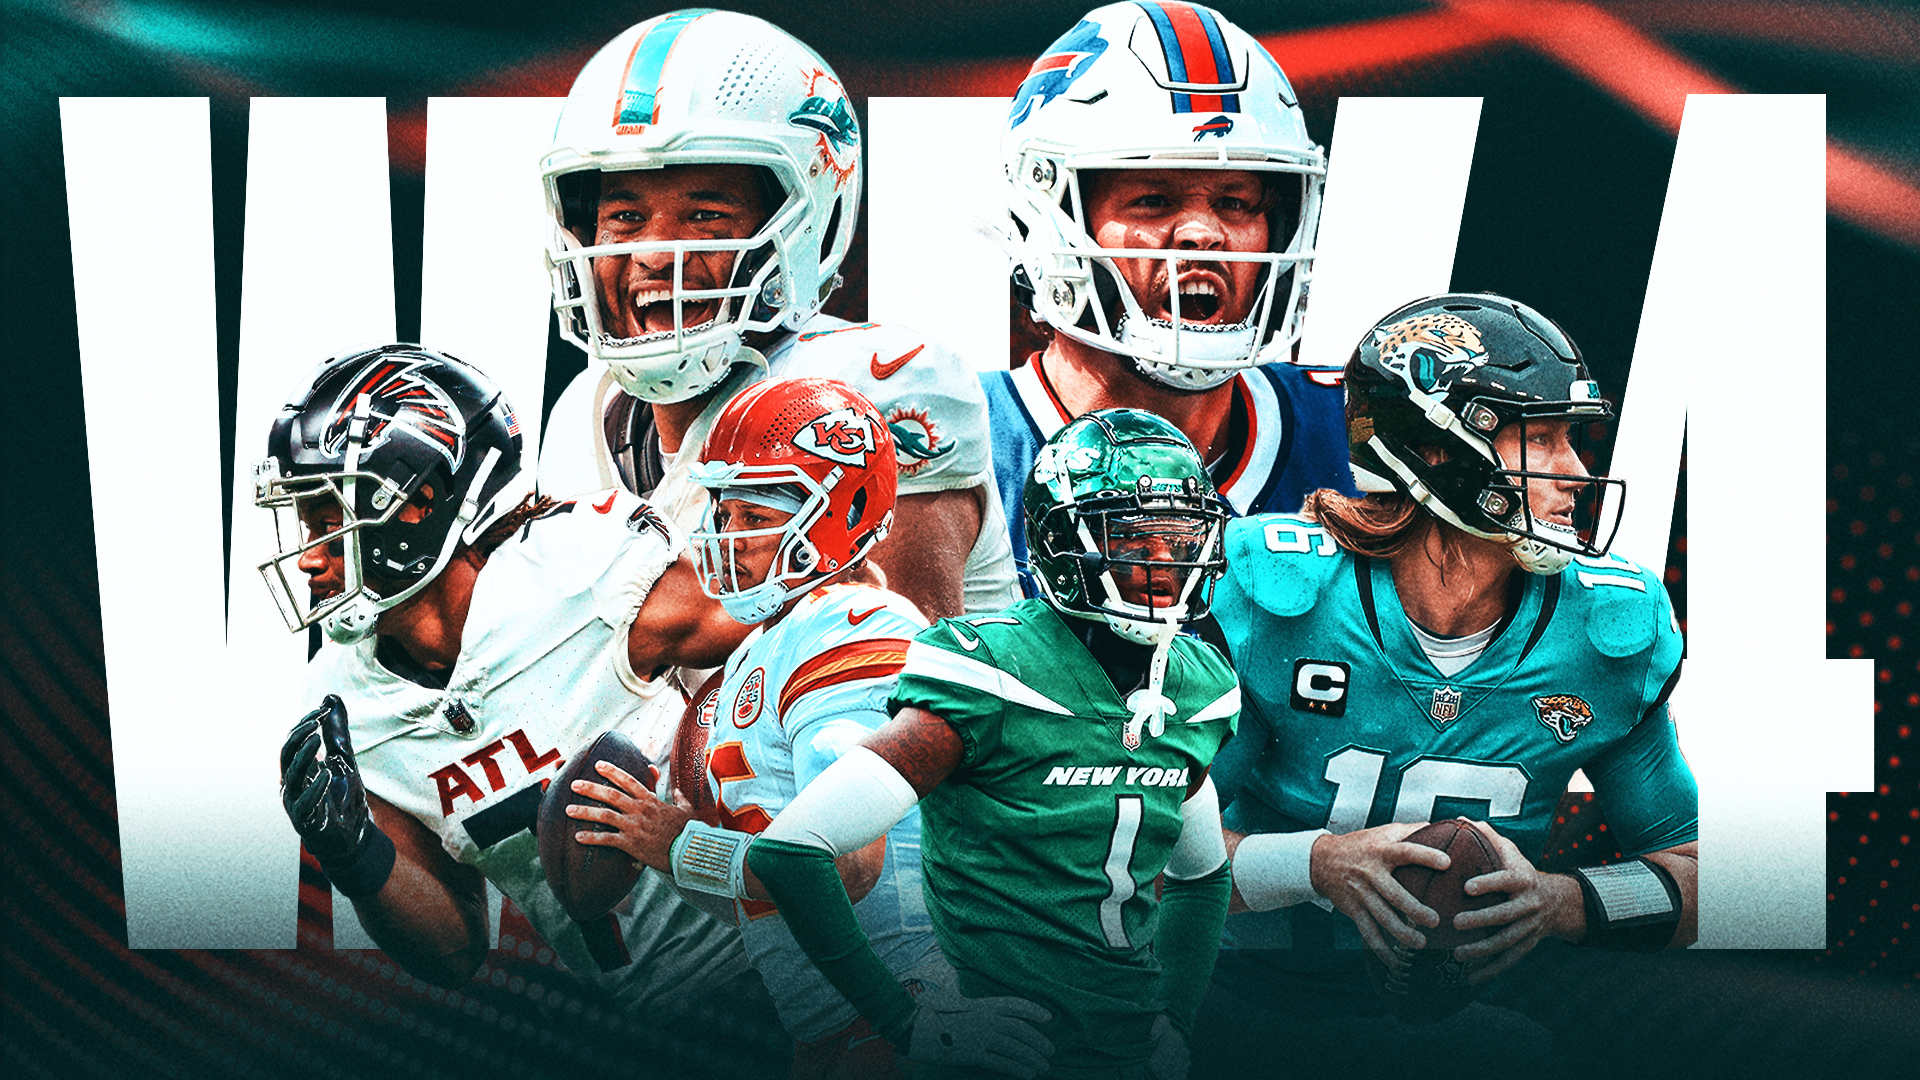 New York Jets vs. Miami Dolphins: How to watch NFL Week 11